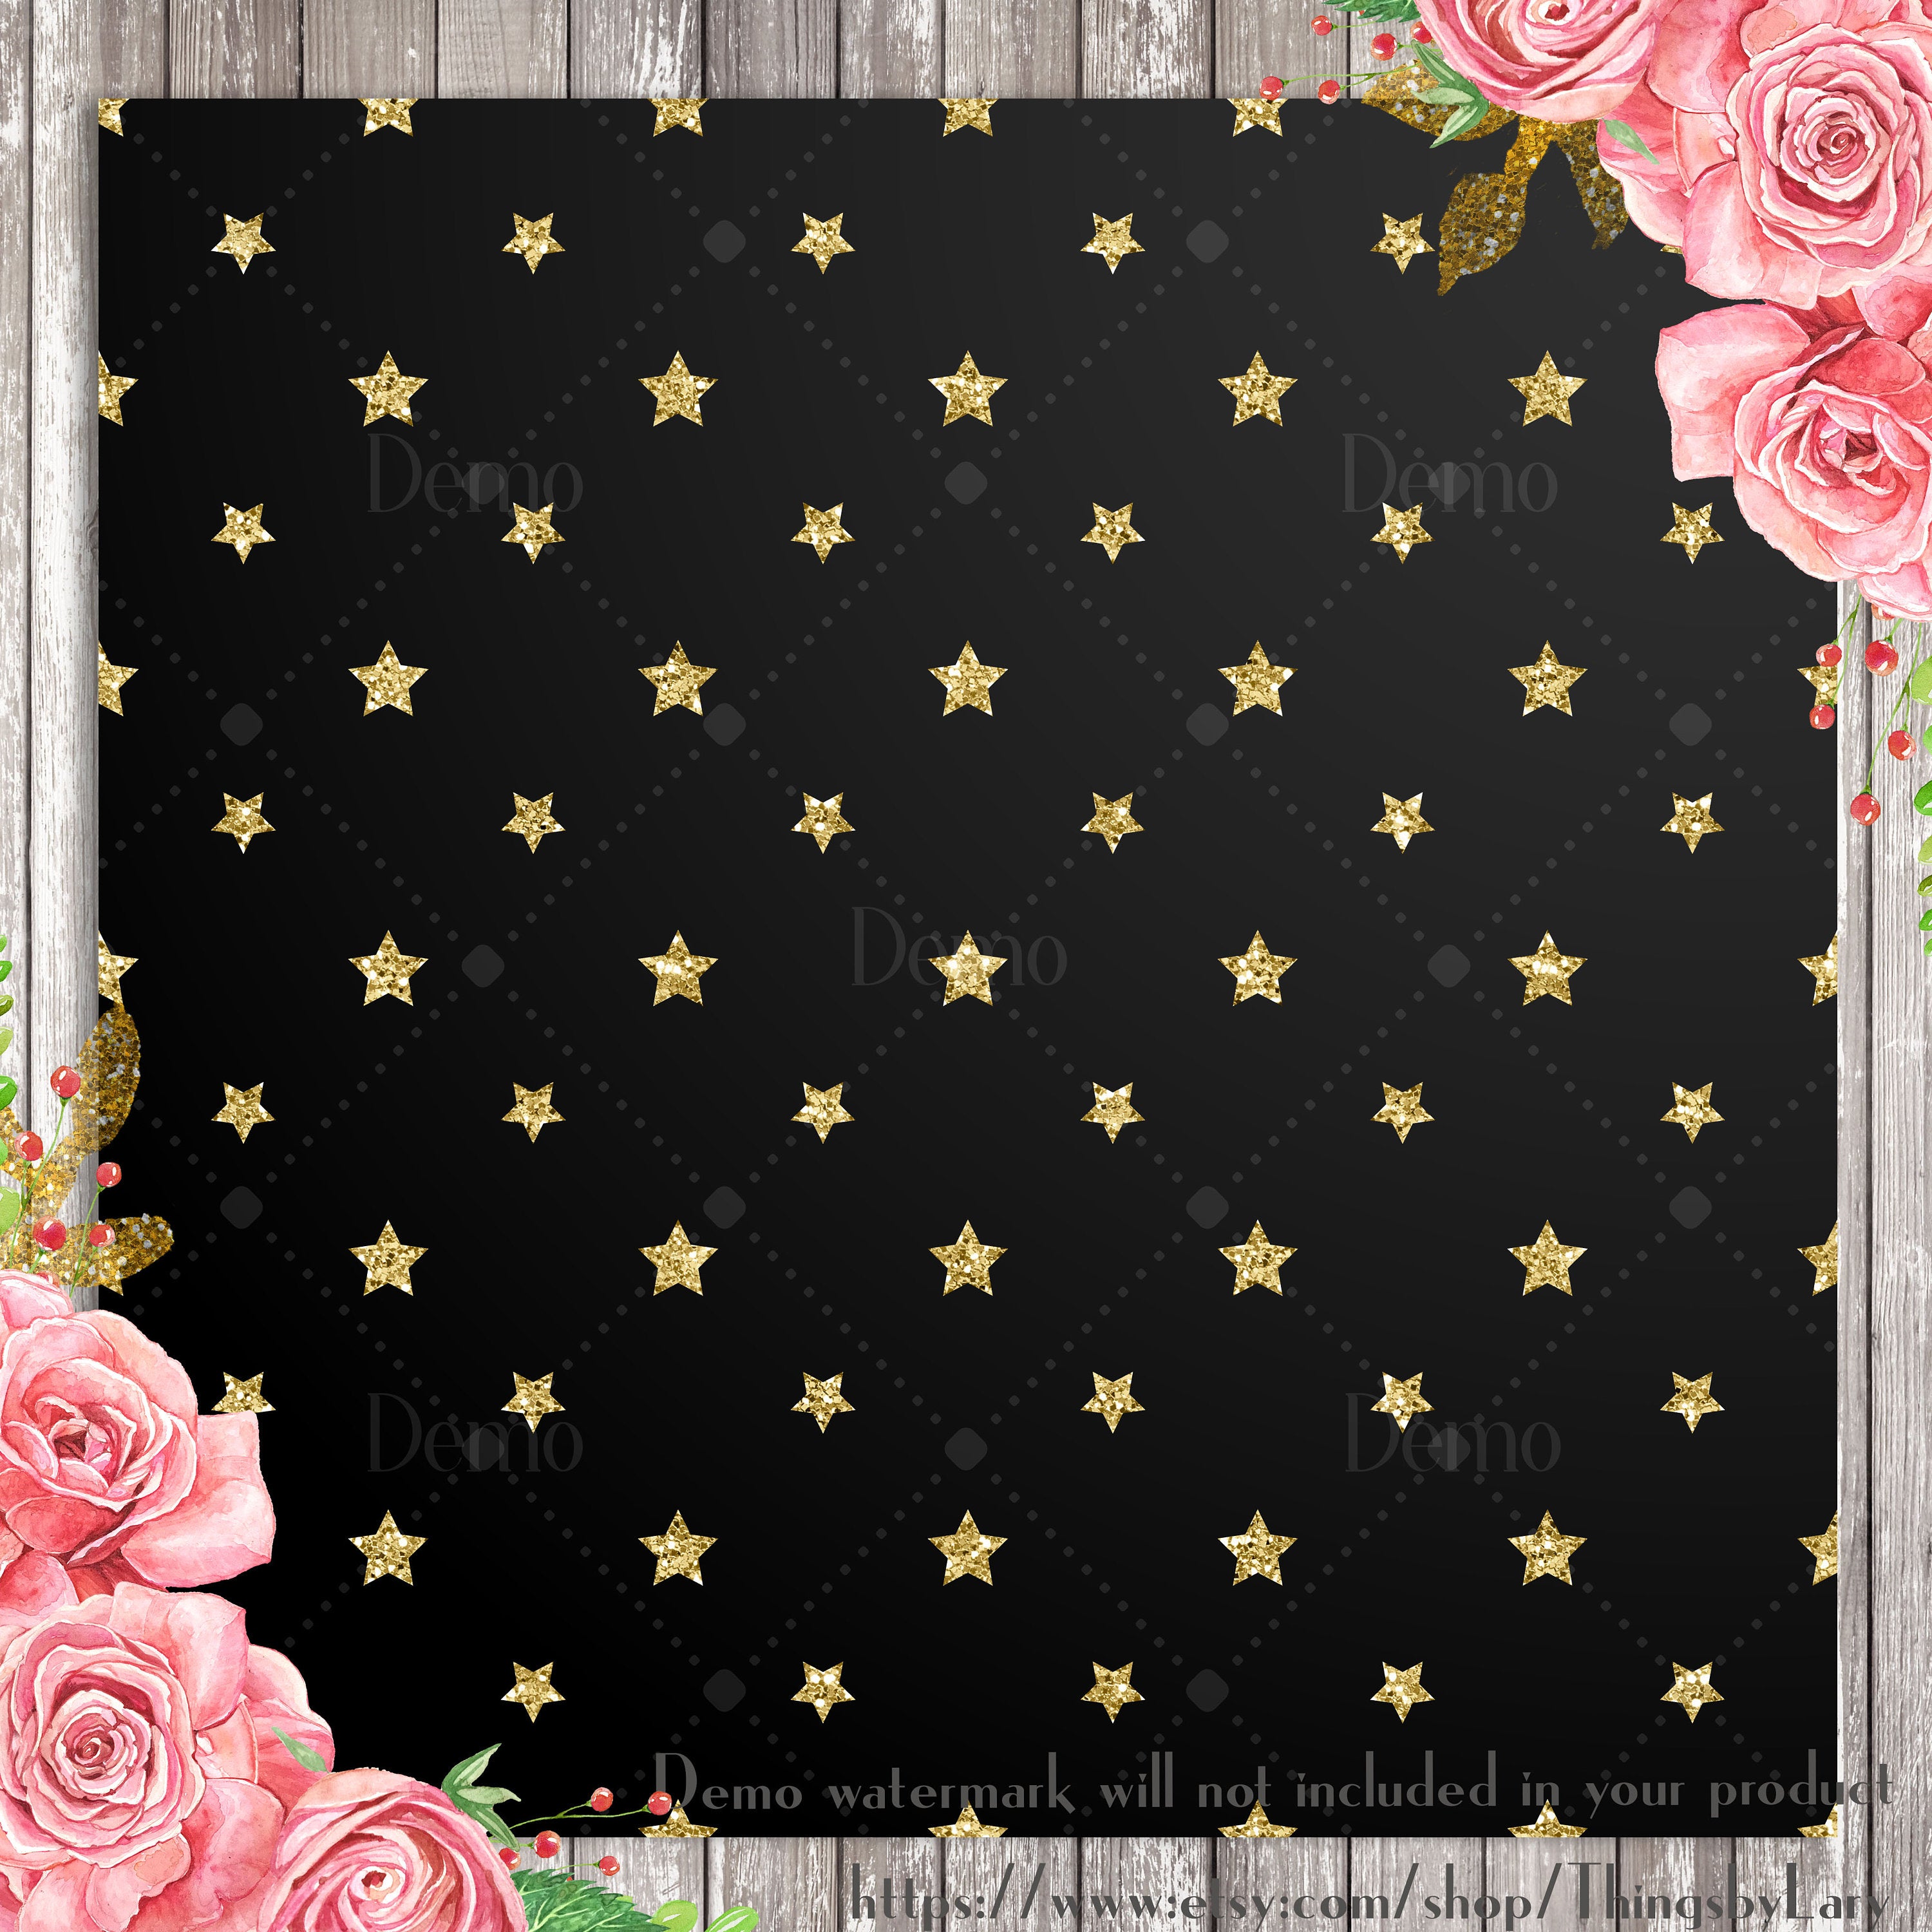 12 Gold Glitter Star Digital Papers 12 inch 300 Dpi Planner Paper Commercial Use Scrapbook Paper Gold Glitter Star Luxury Gold Glitter Paper